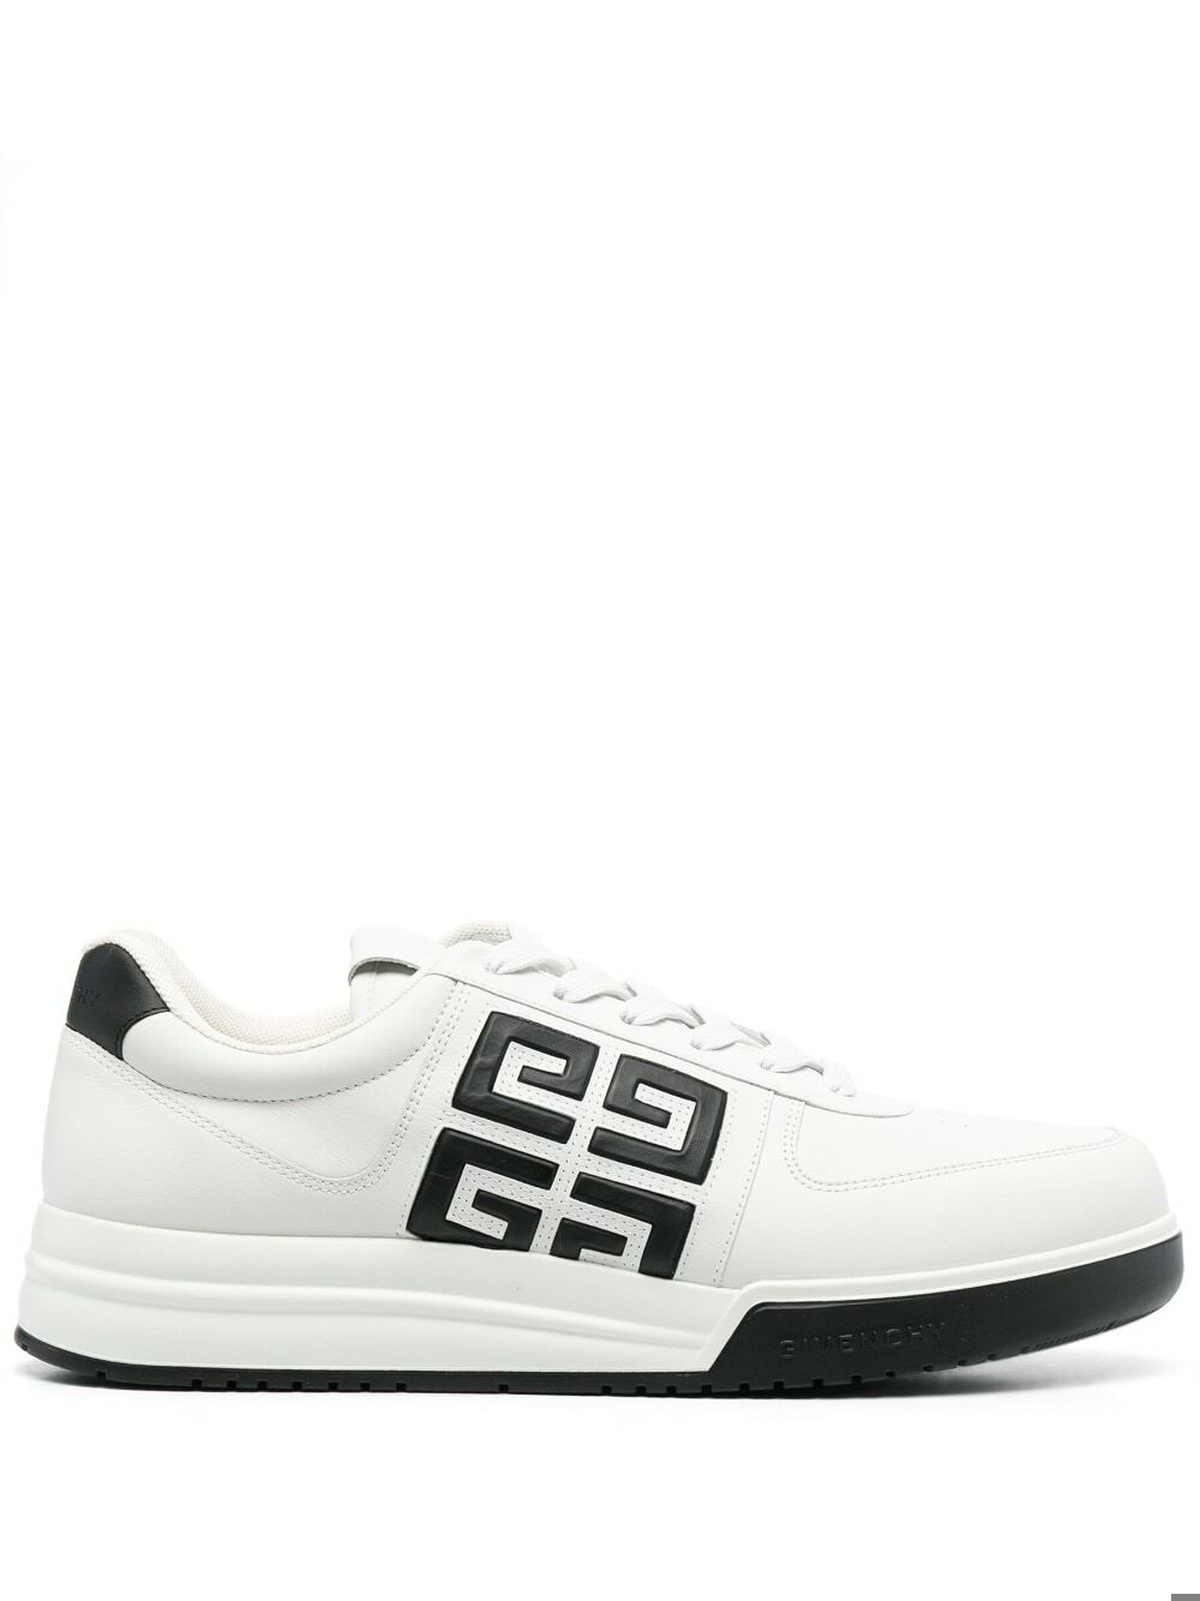 GIVENCHY - G4 Leather Sneakers Givenchy